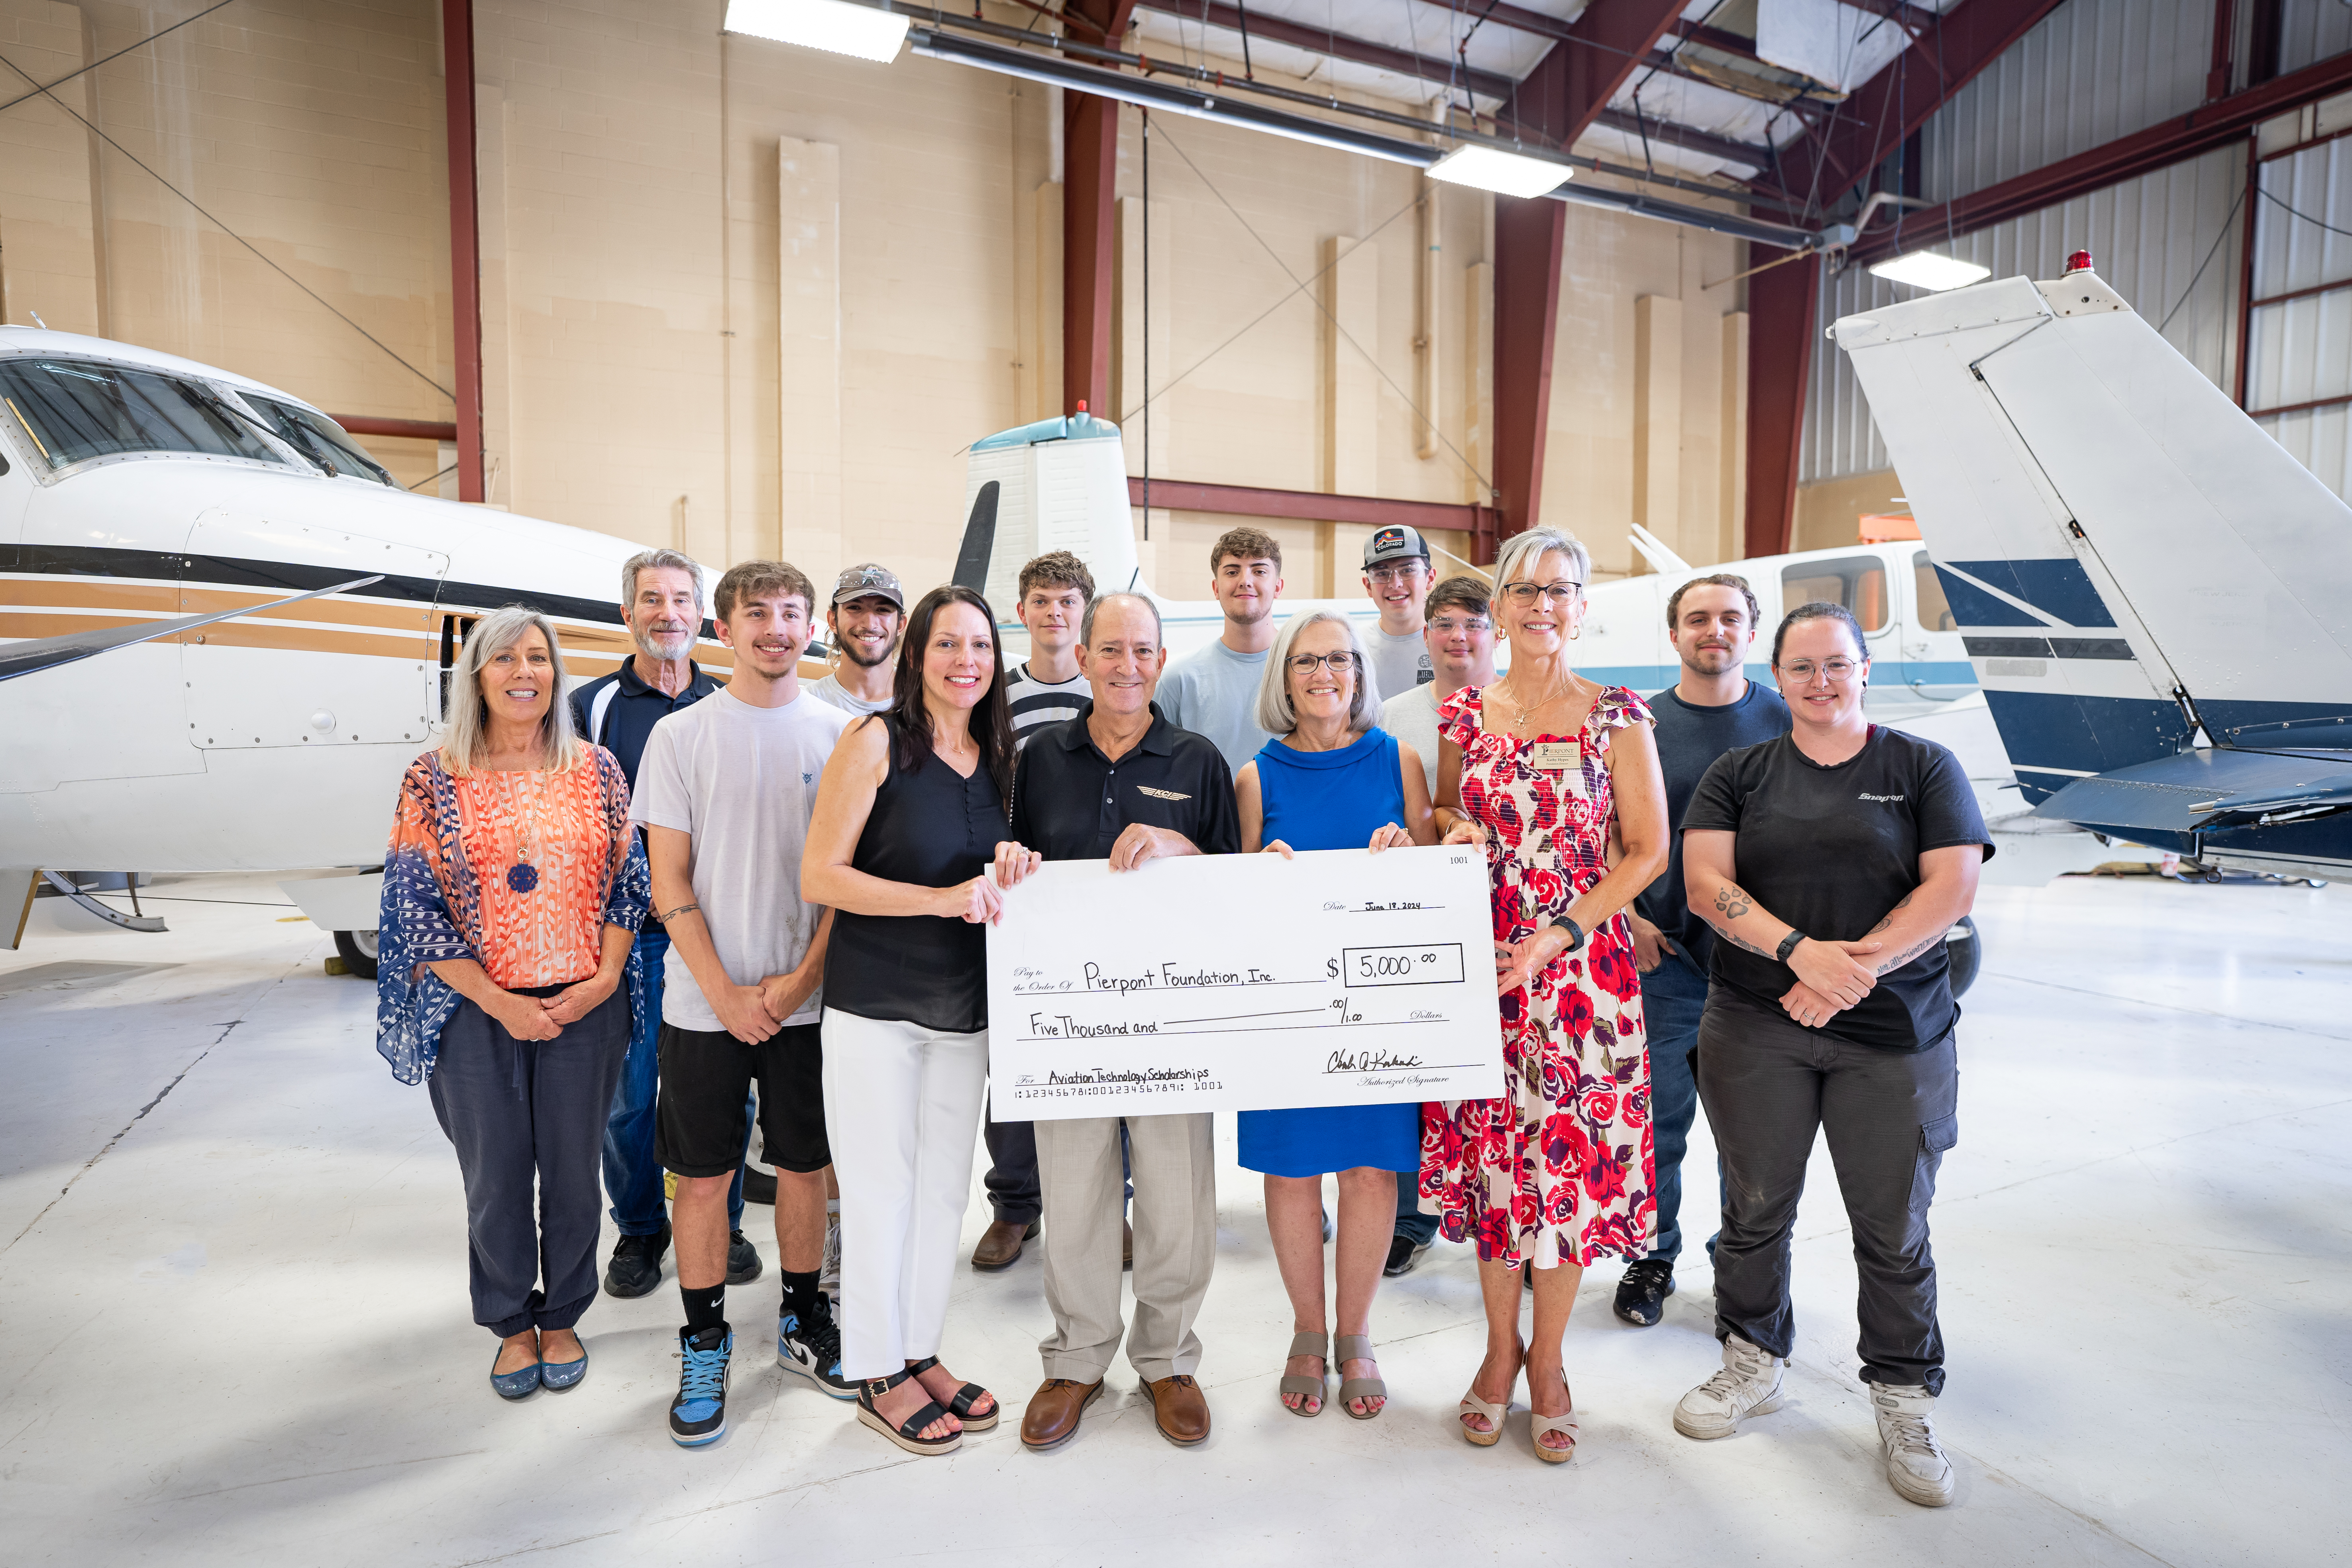 The Koukoulis Family is featured in the hangar with Pierpont faculty, staff, and students.